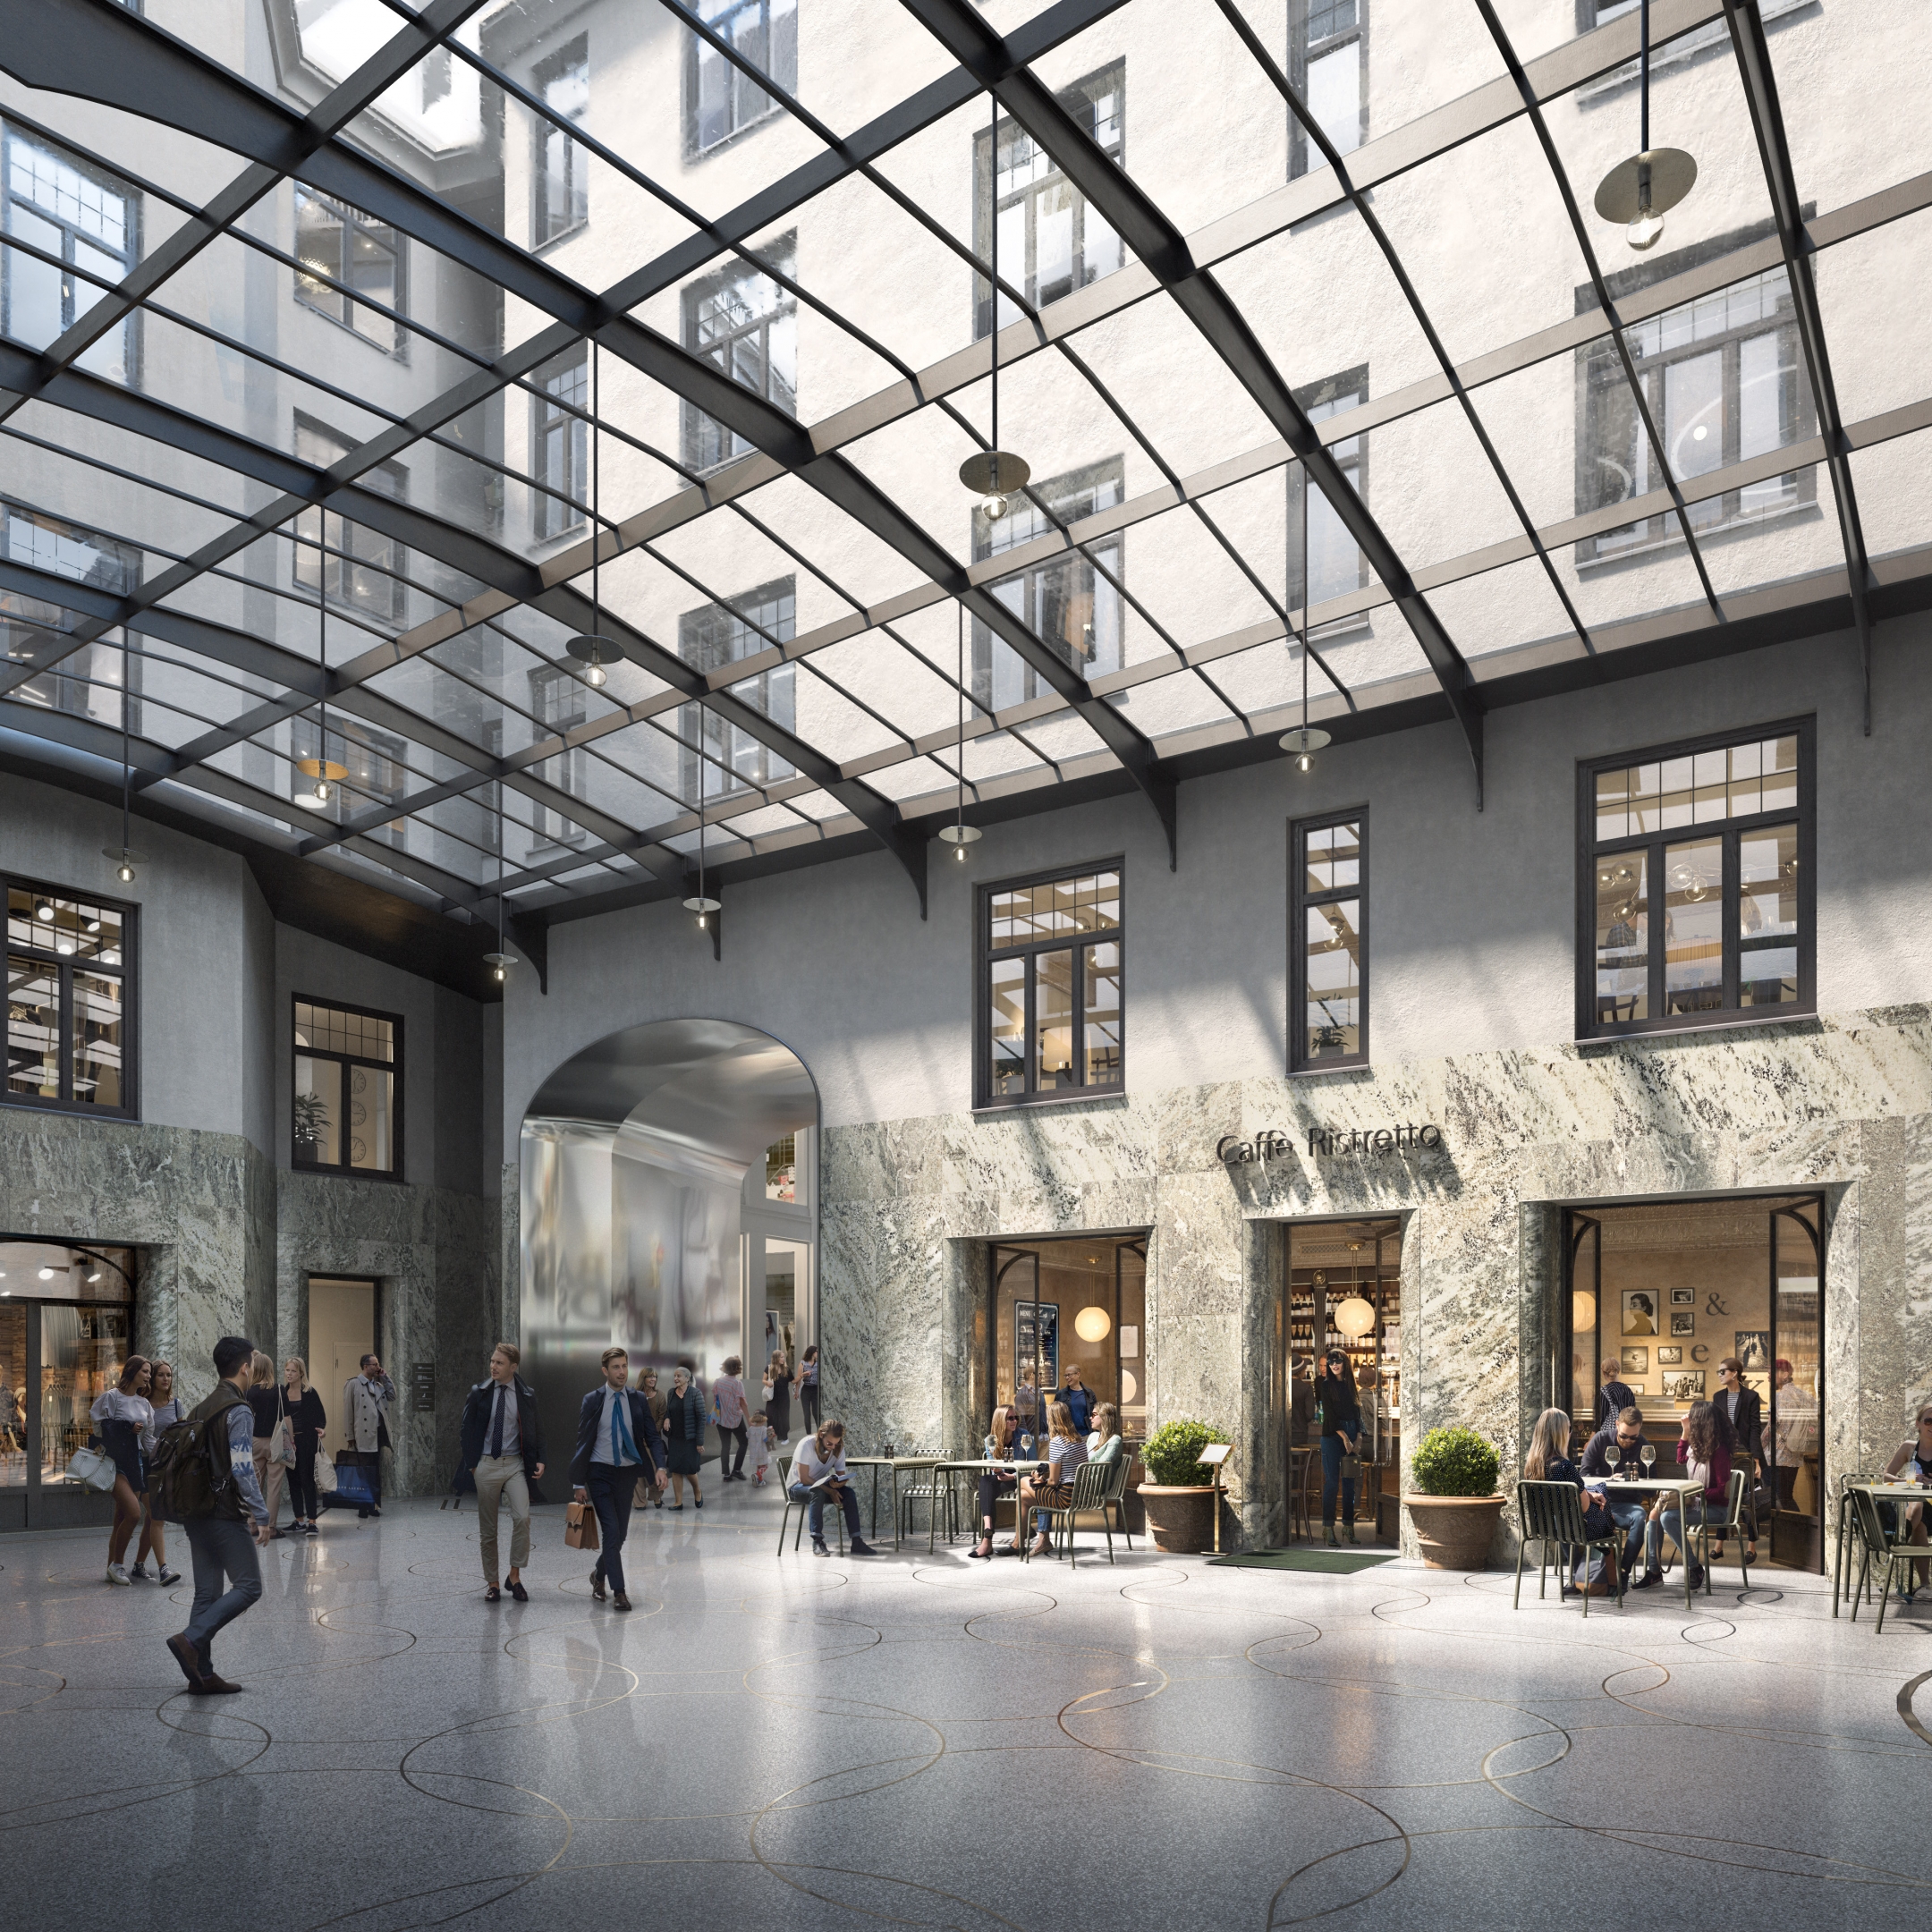 Architectural visualization of Sturekvarteret for TAM Group. A image of the interior inside a retail buildning with glass roof. People walking around in the mall square.